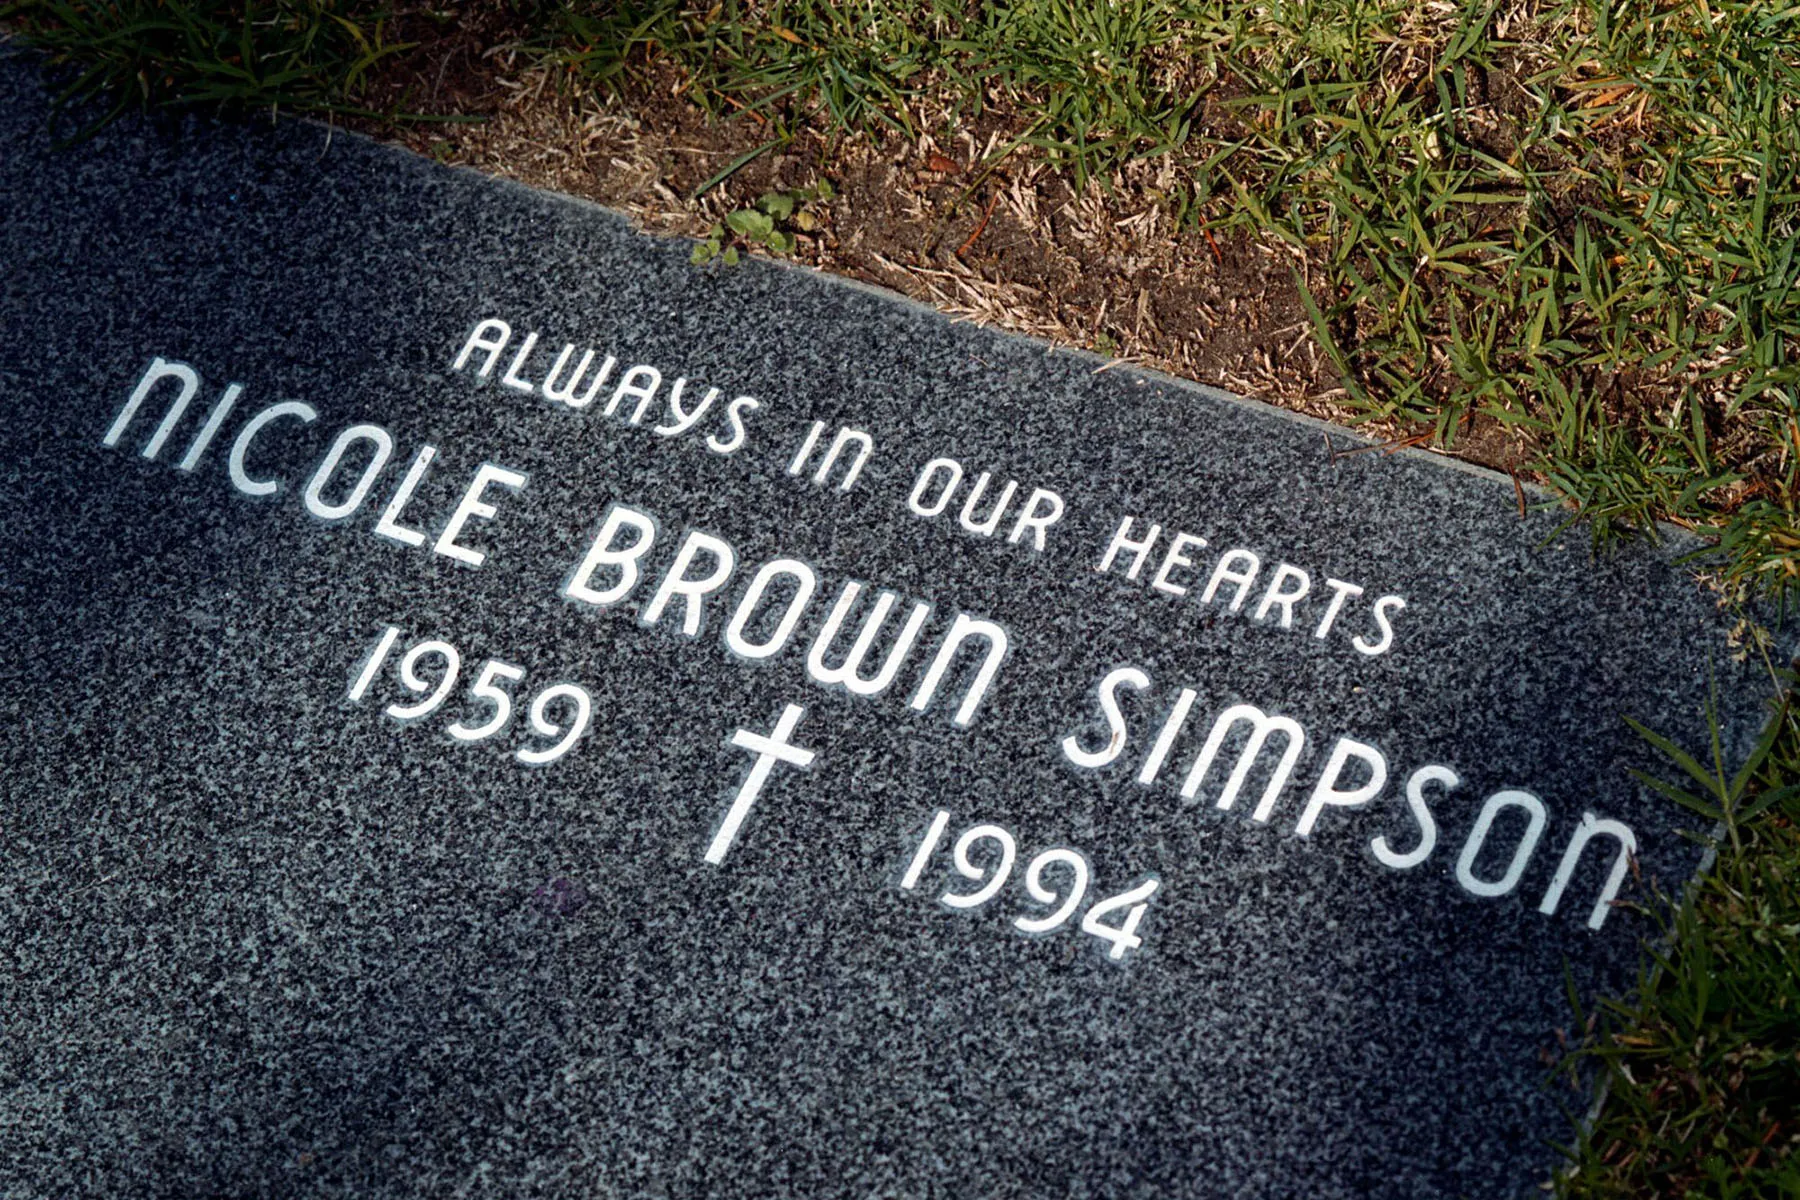 The grave of Nicole Brown Simpson reads "always in our hearts, Nicole Brown Simpson, 1959-1994